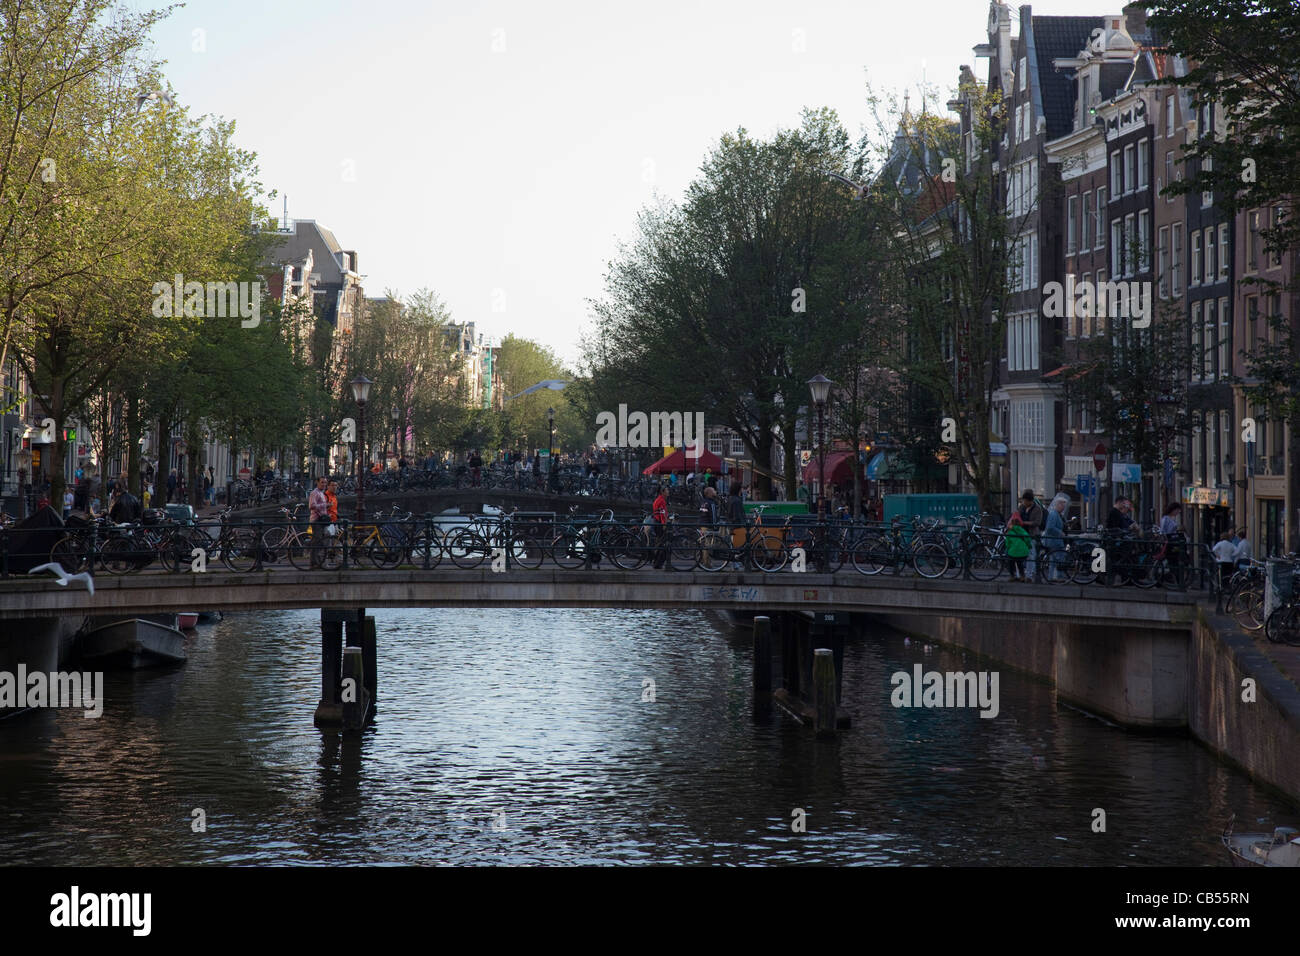 A canal in Amsterdam, The Netherlands. Stock Photo